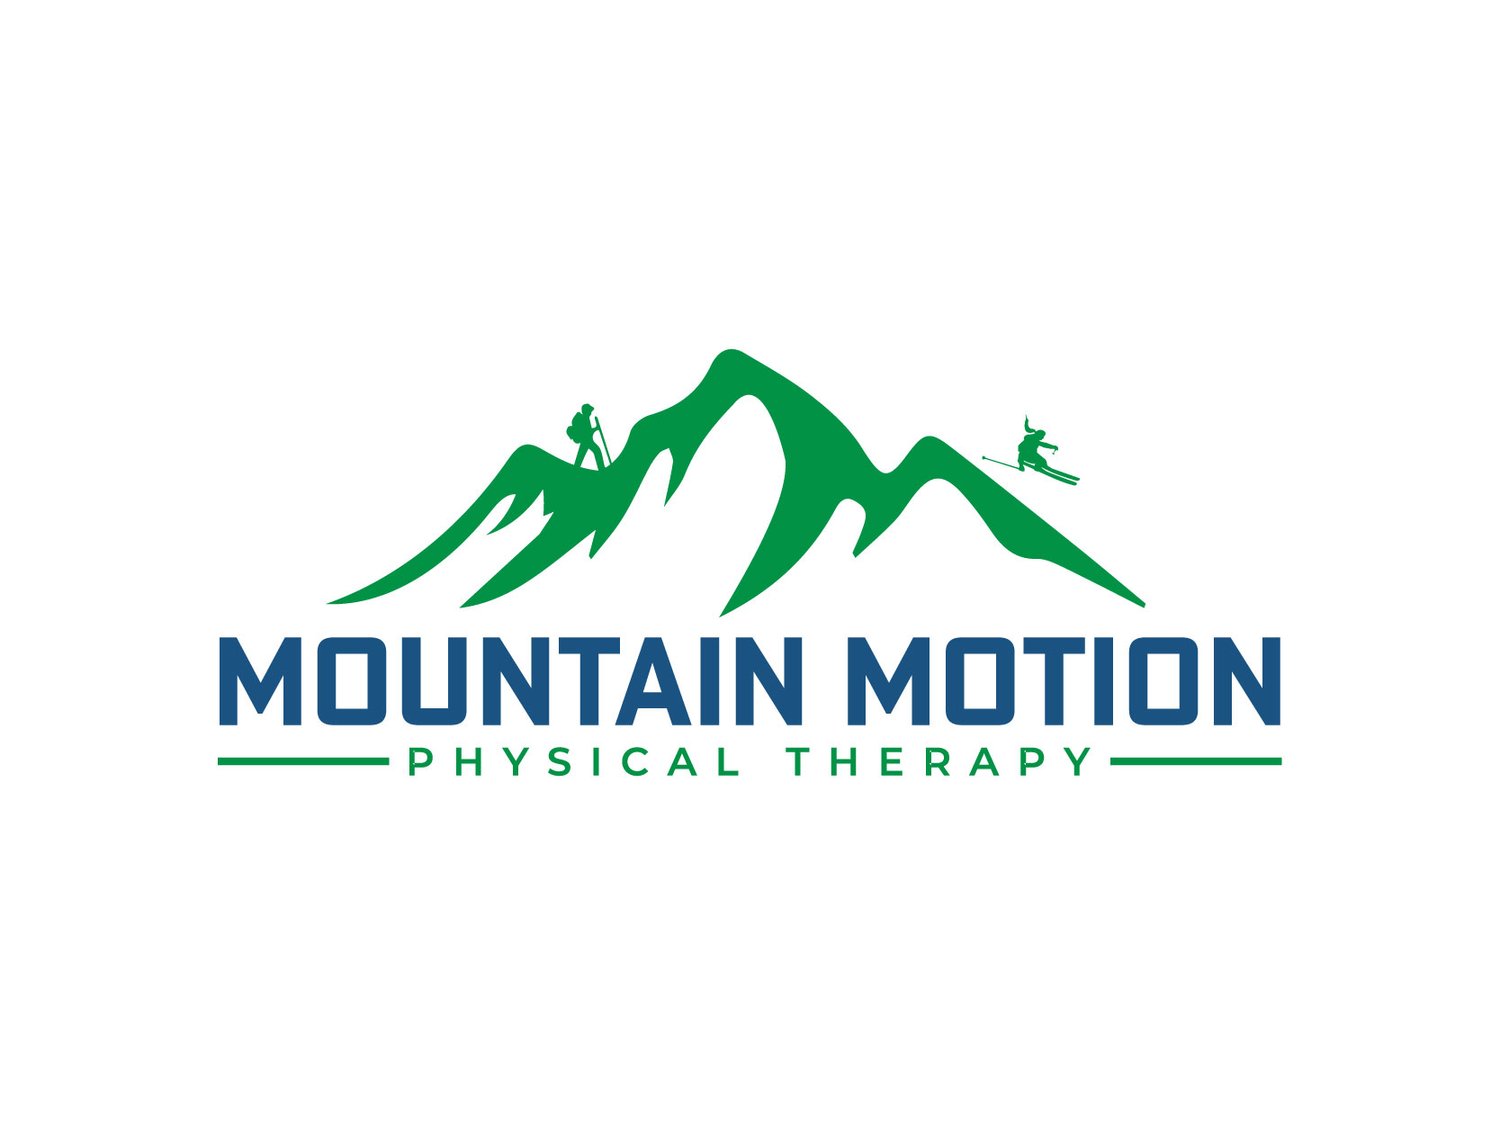 Mountain Motion Physical Therapy